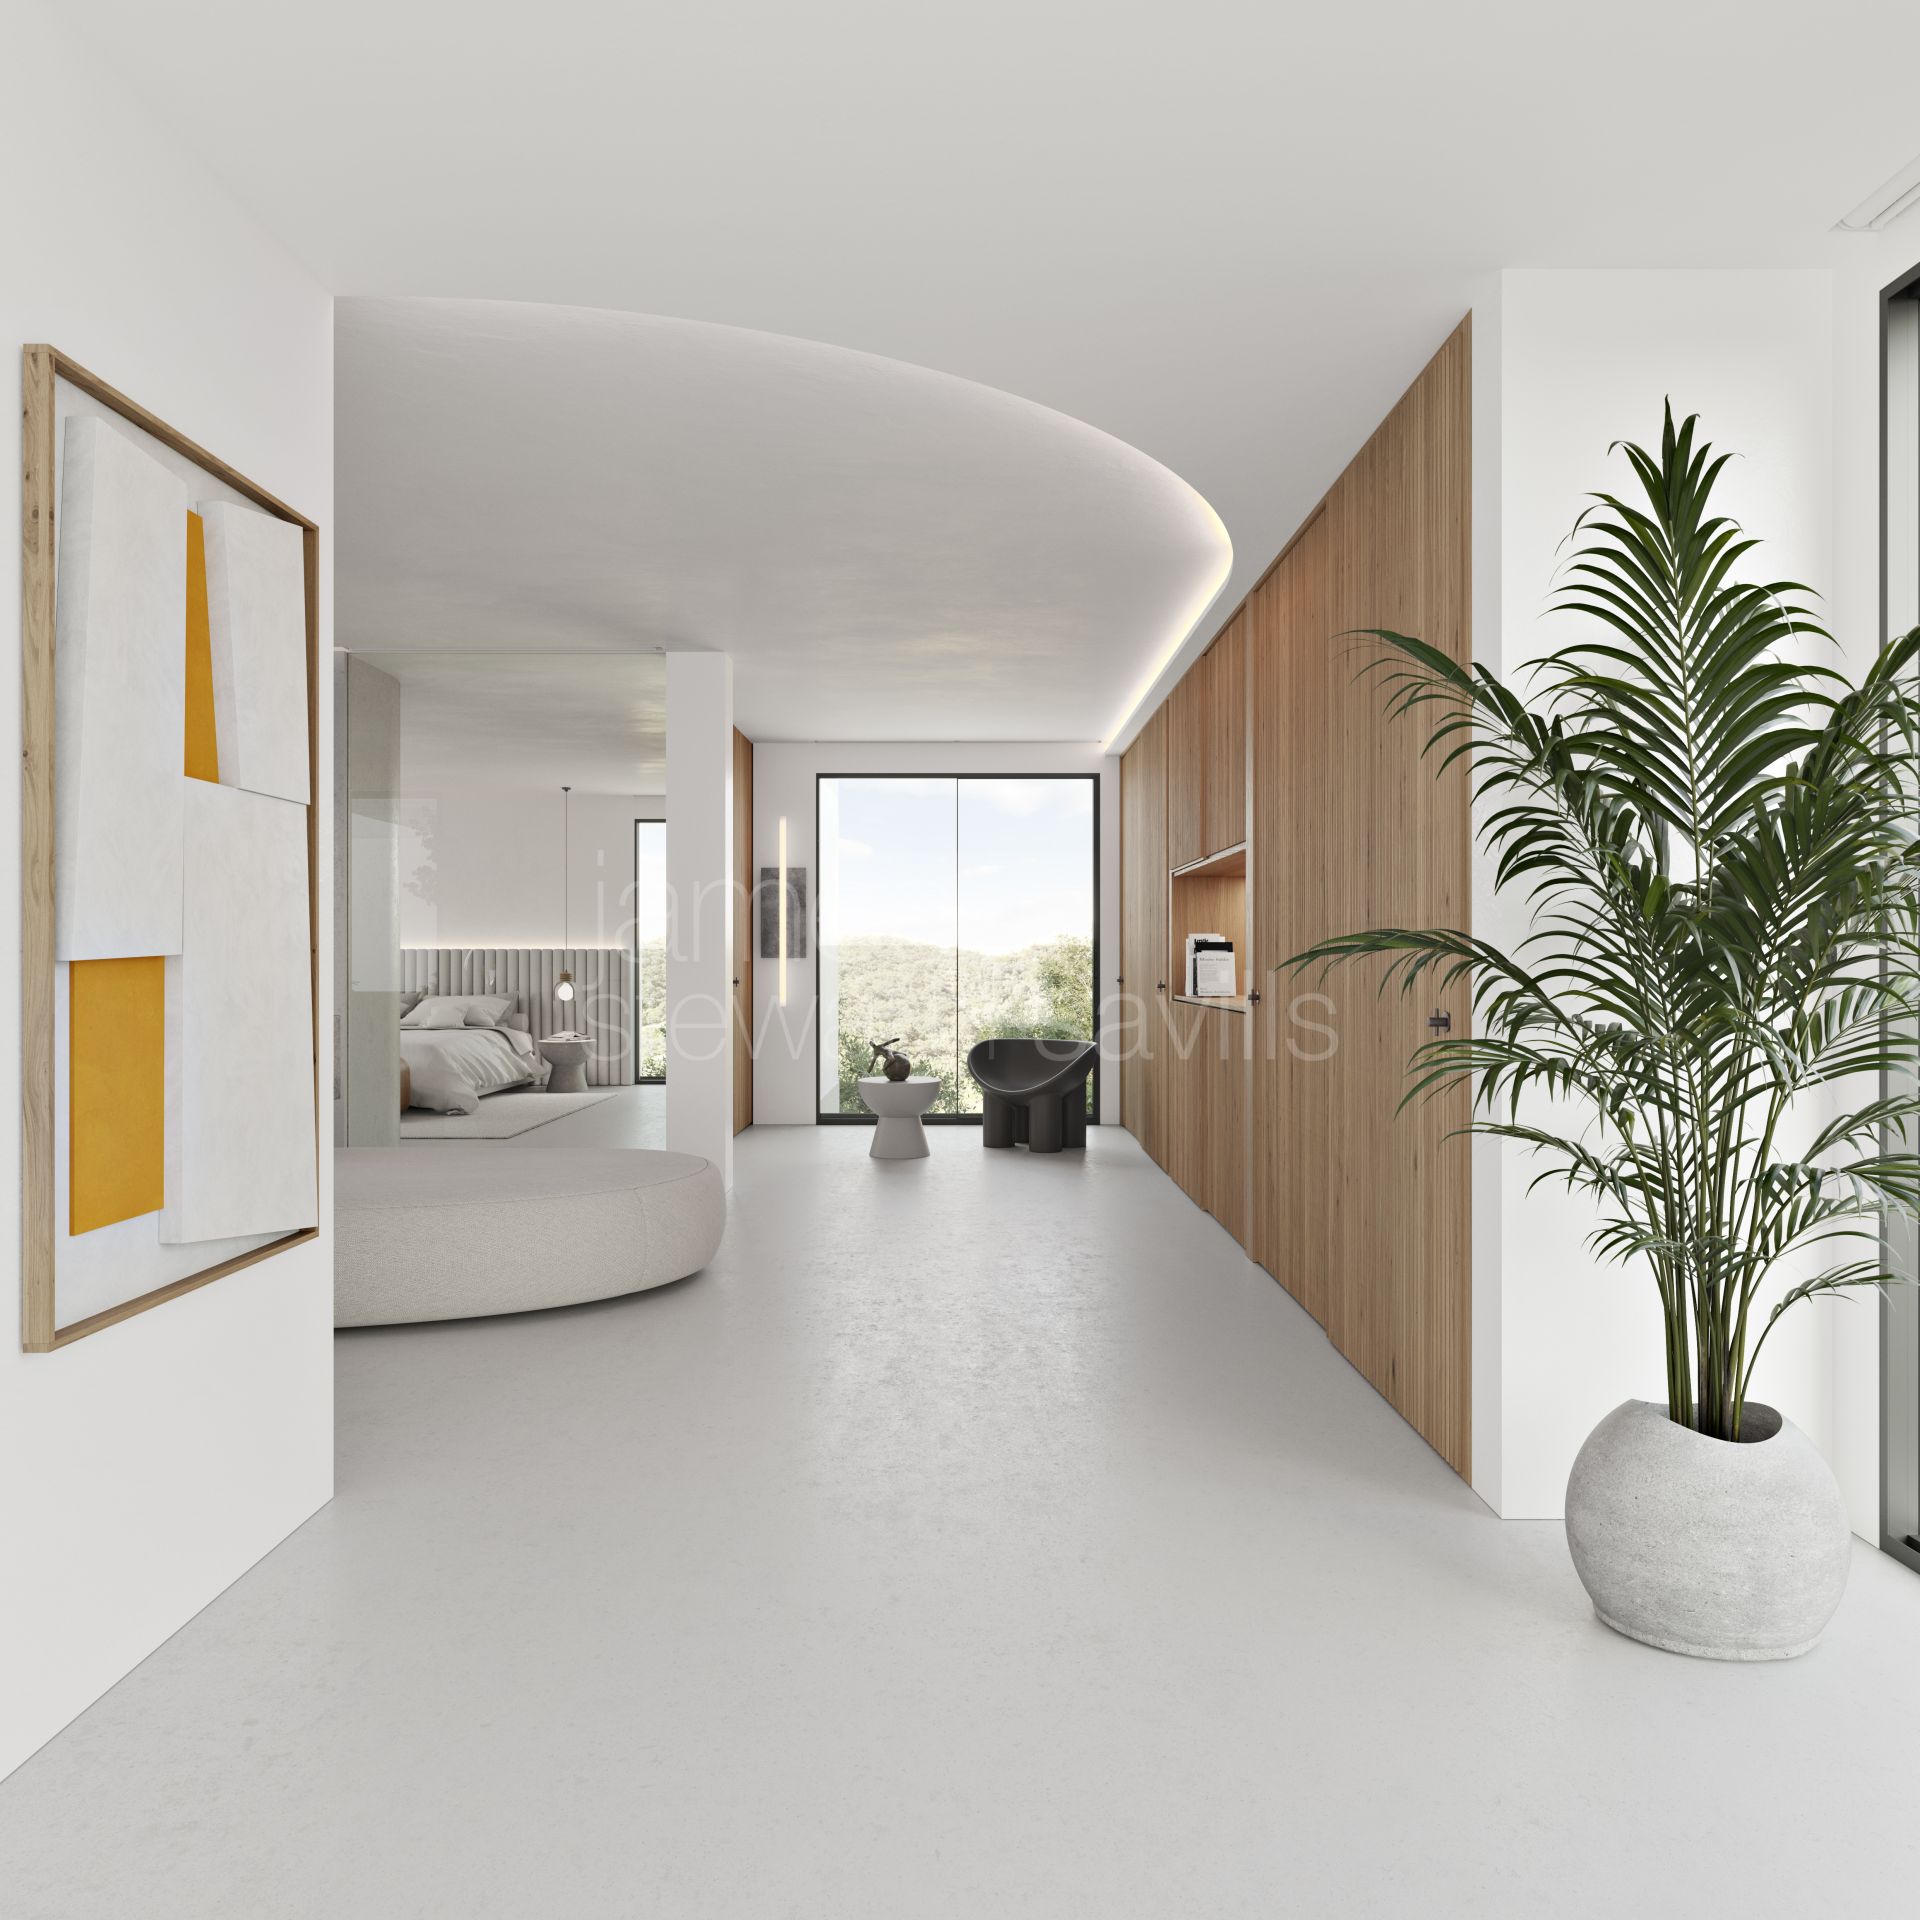 Fabulous new project of futuristic apartments next to Sotogrande - 3 bedroom units from € 1,109,000